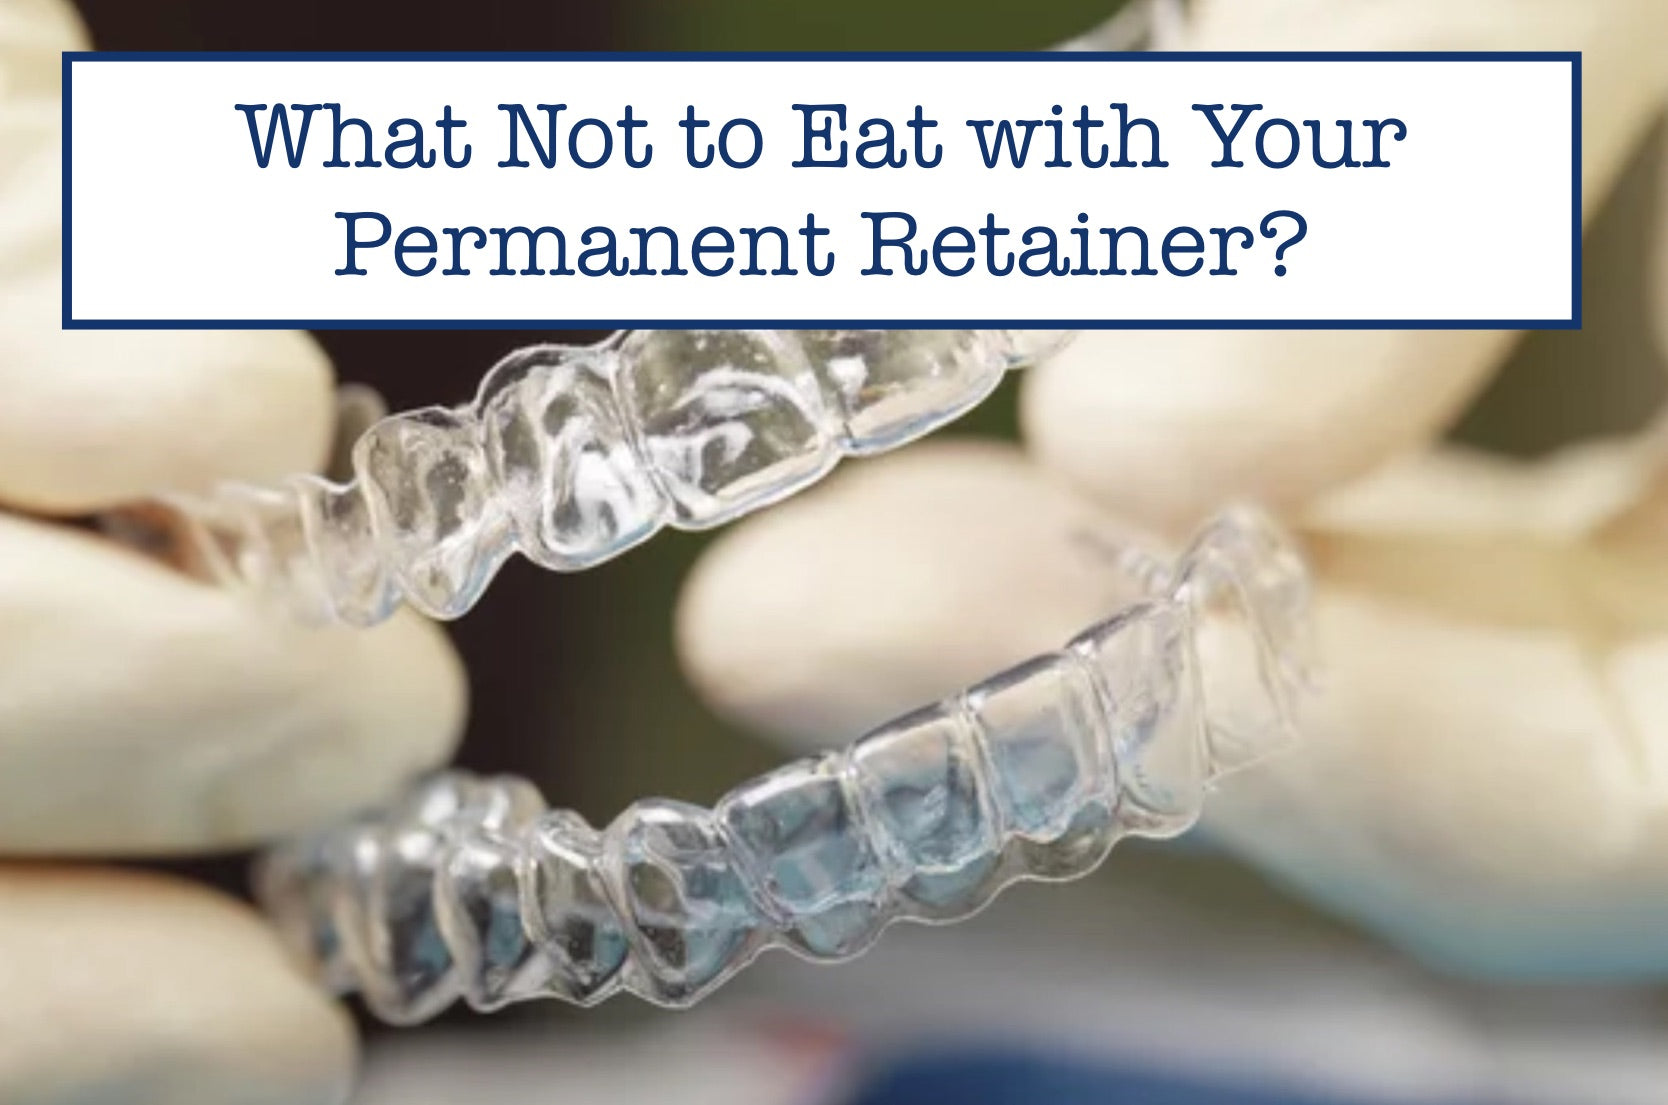 What Not to Eat with Your Permanent Retainer?